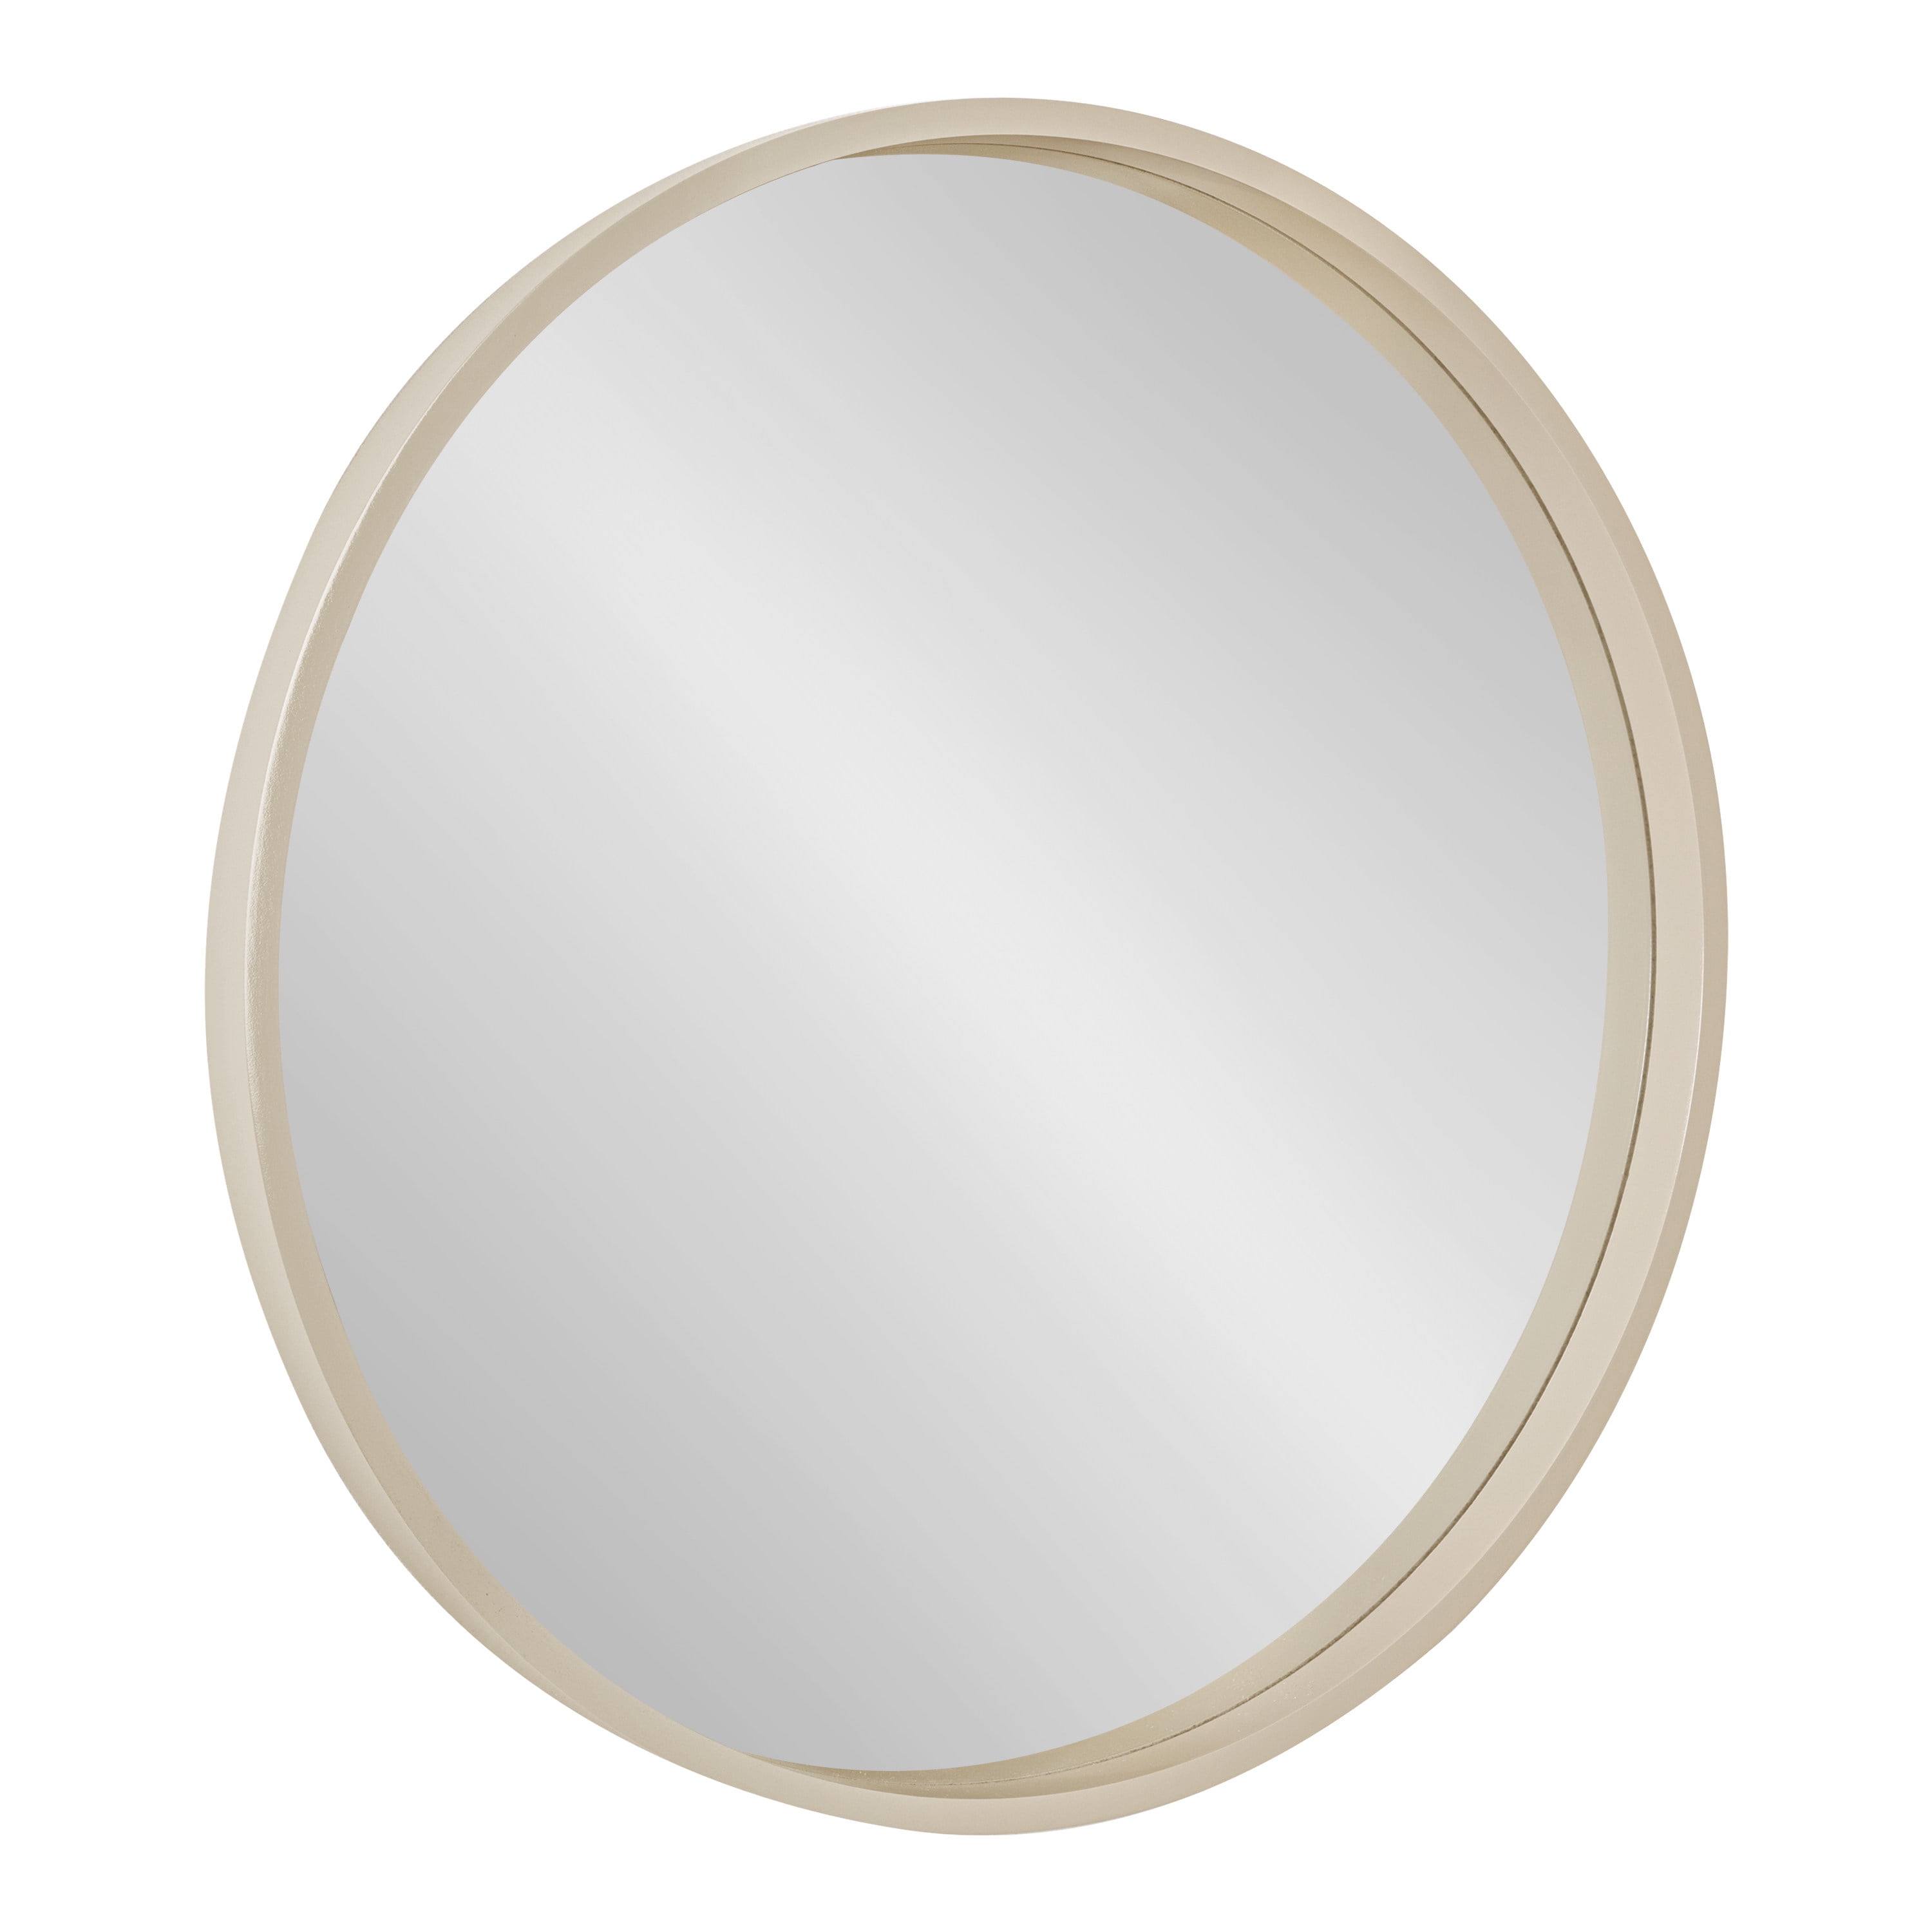 Kate and Laurel Travis Mid-Century Round Wall Mirror, 25.6 inch Diameter,  Light Brown Sand, Modern Accent Mirror for Wall